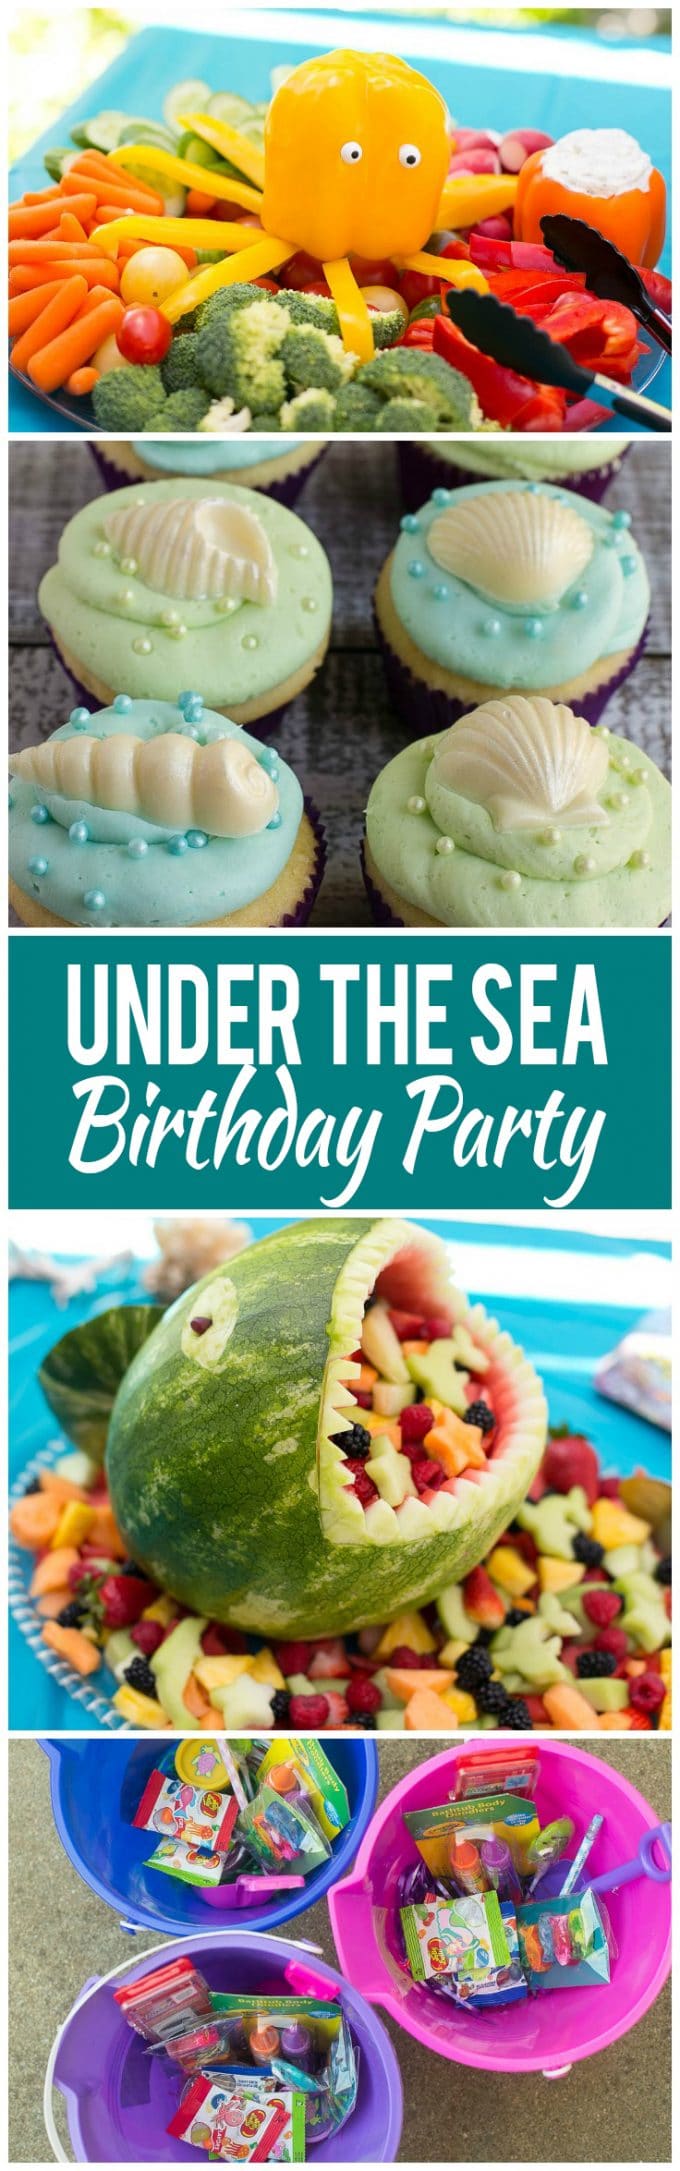 A complete guide on how to throw an under the sea birthday party with an under the sea theme, including ideas for food, activities and party favors.